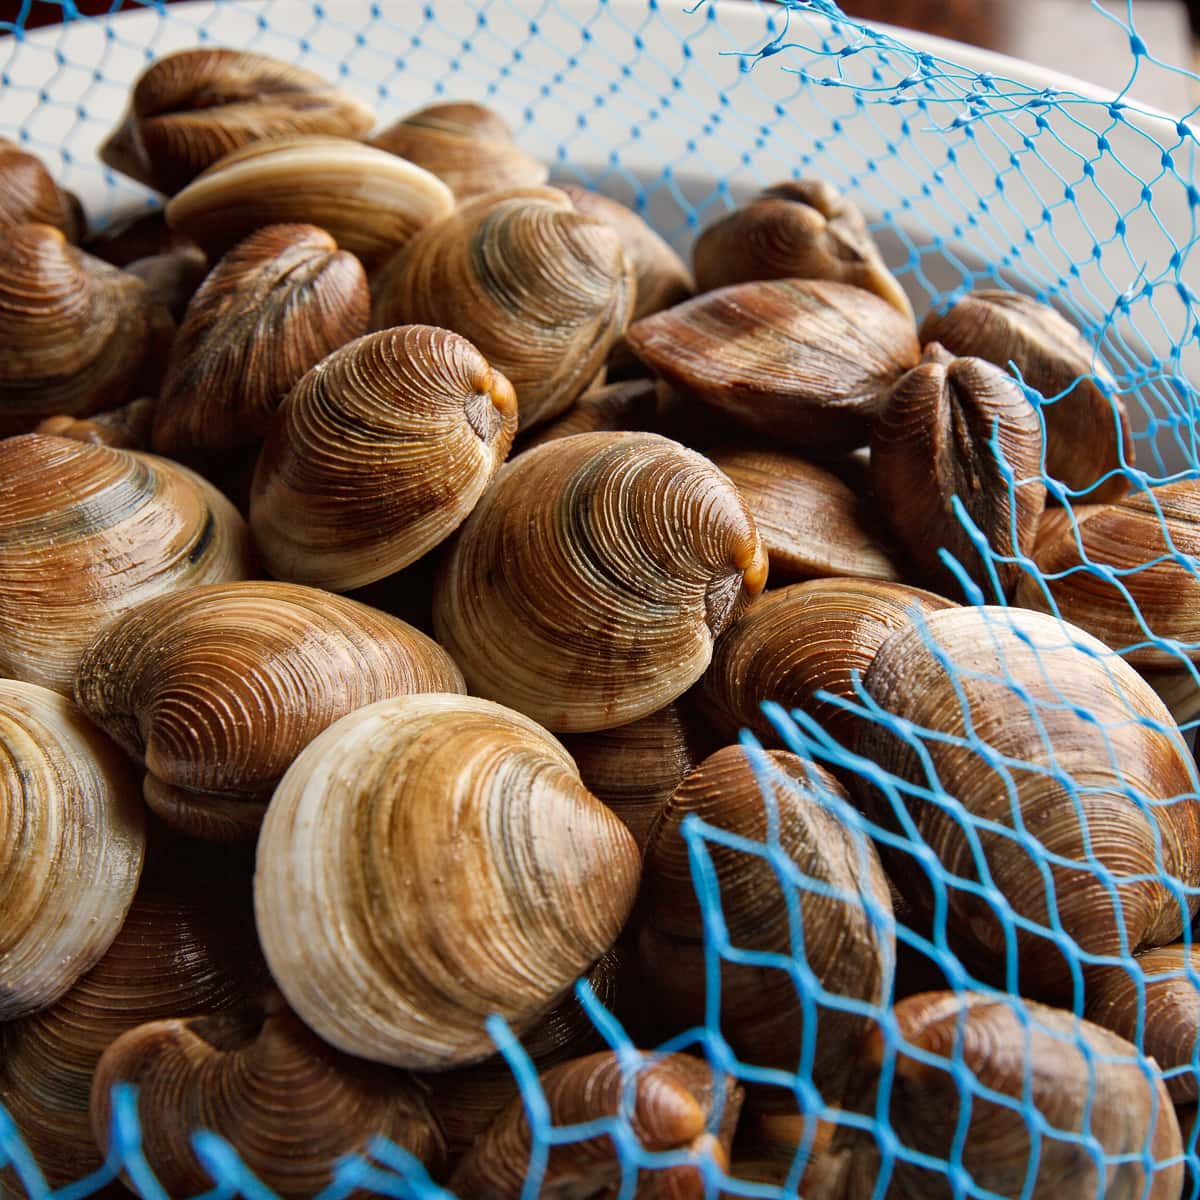 Fresh clams in a blue netted bag ready for cooking.